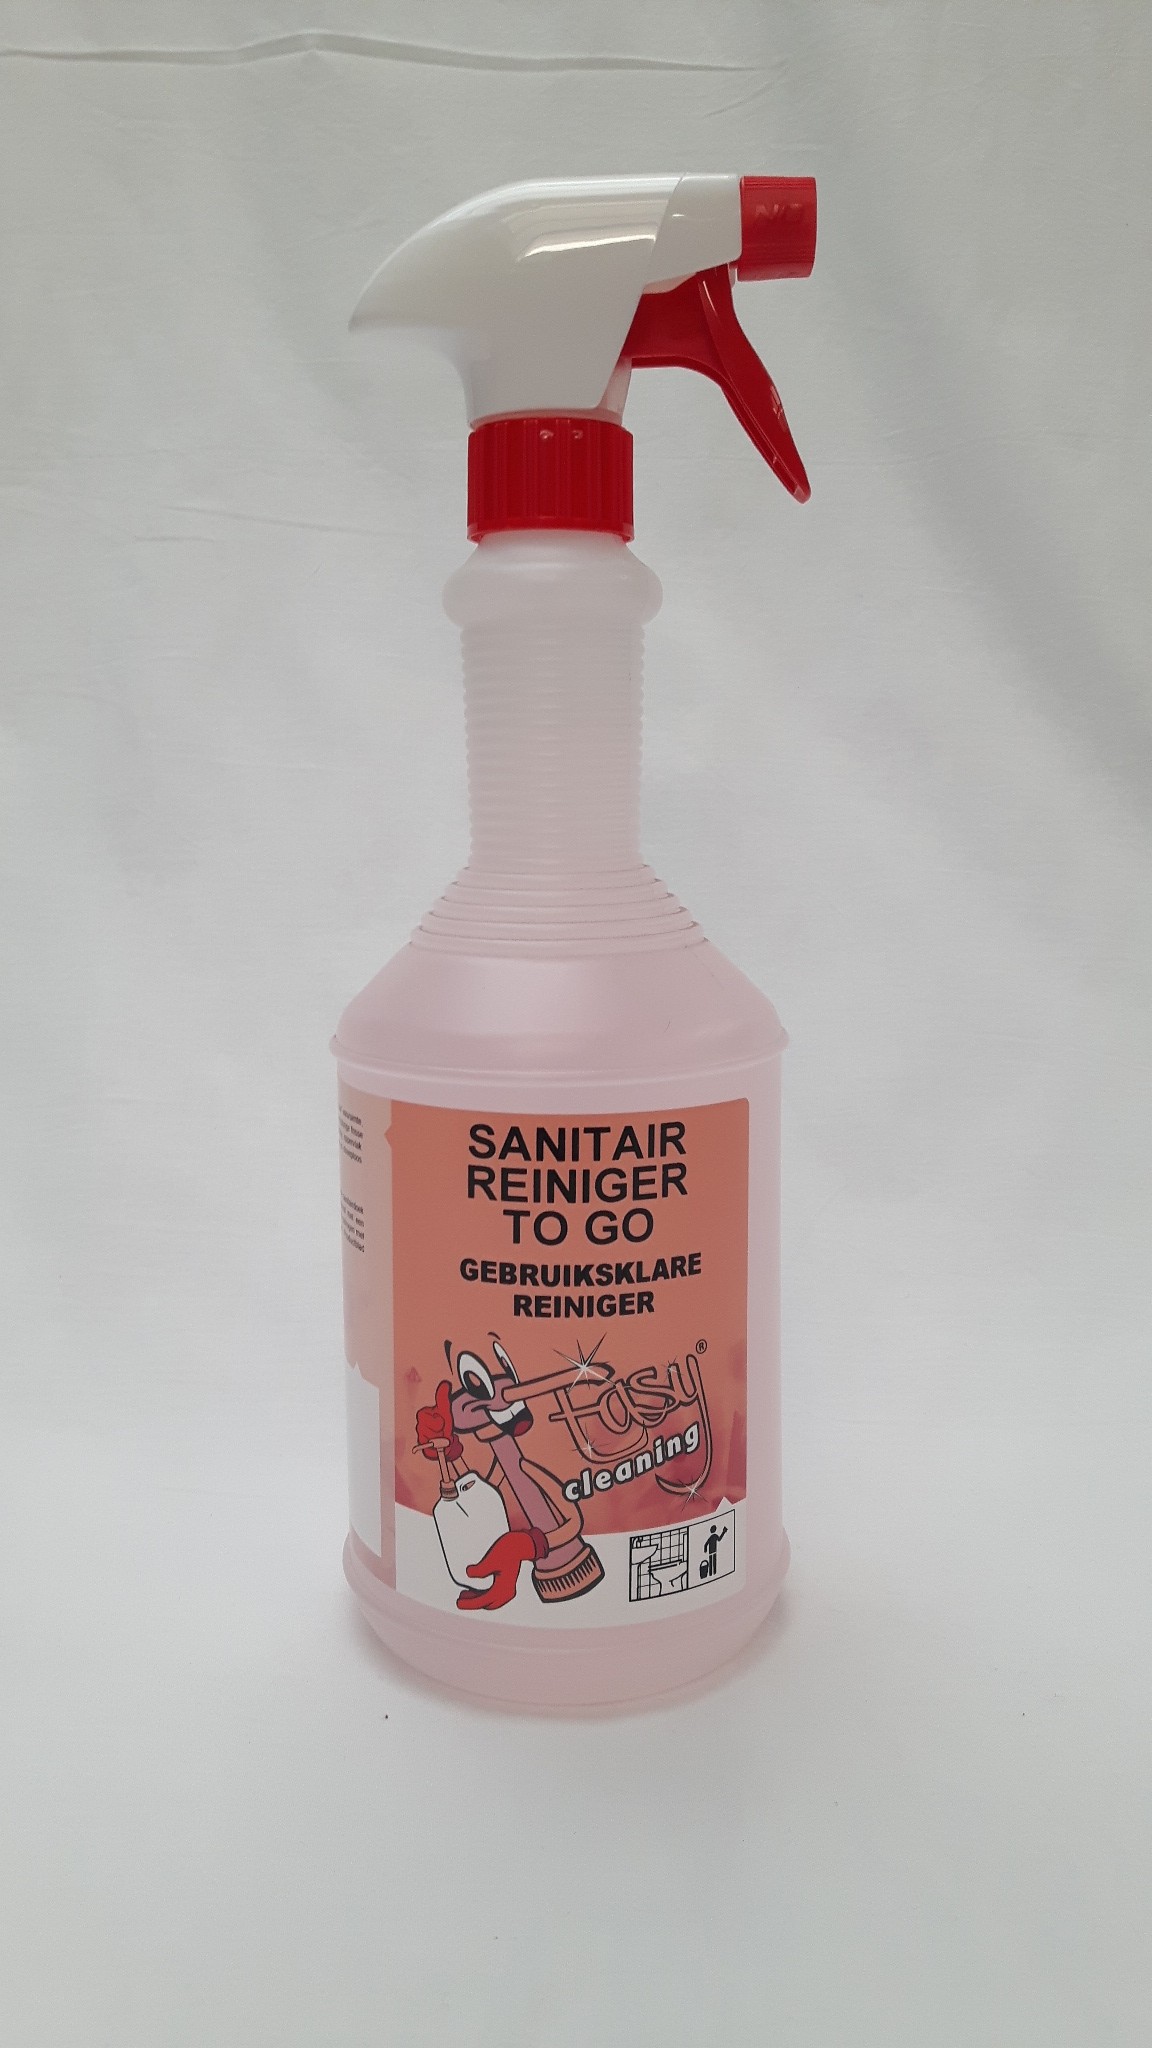 Easy Cleaning nr. 2 Sanitair TO GO 1 liter